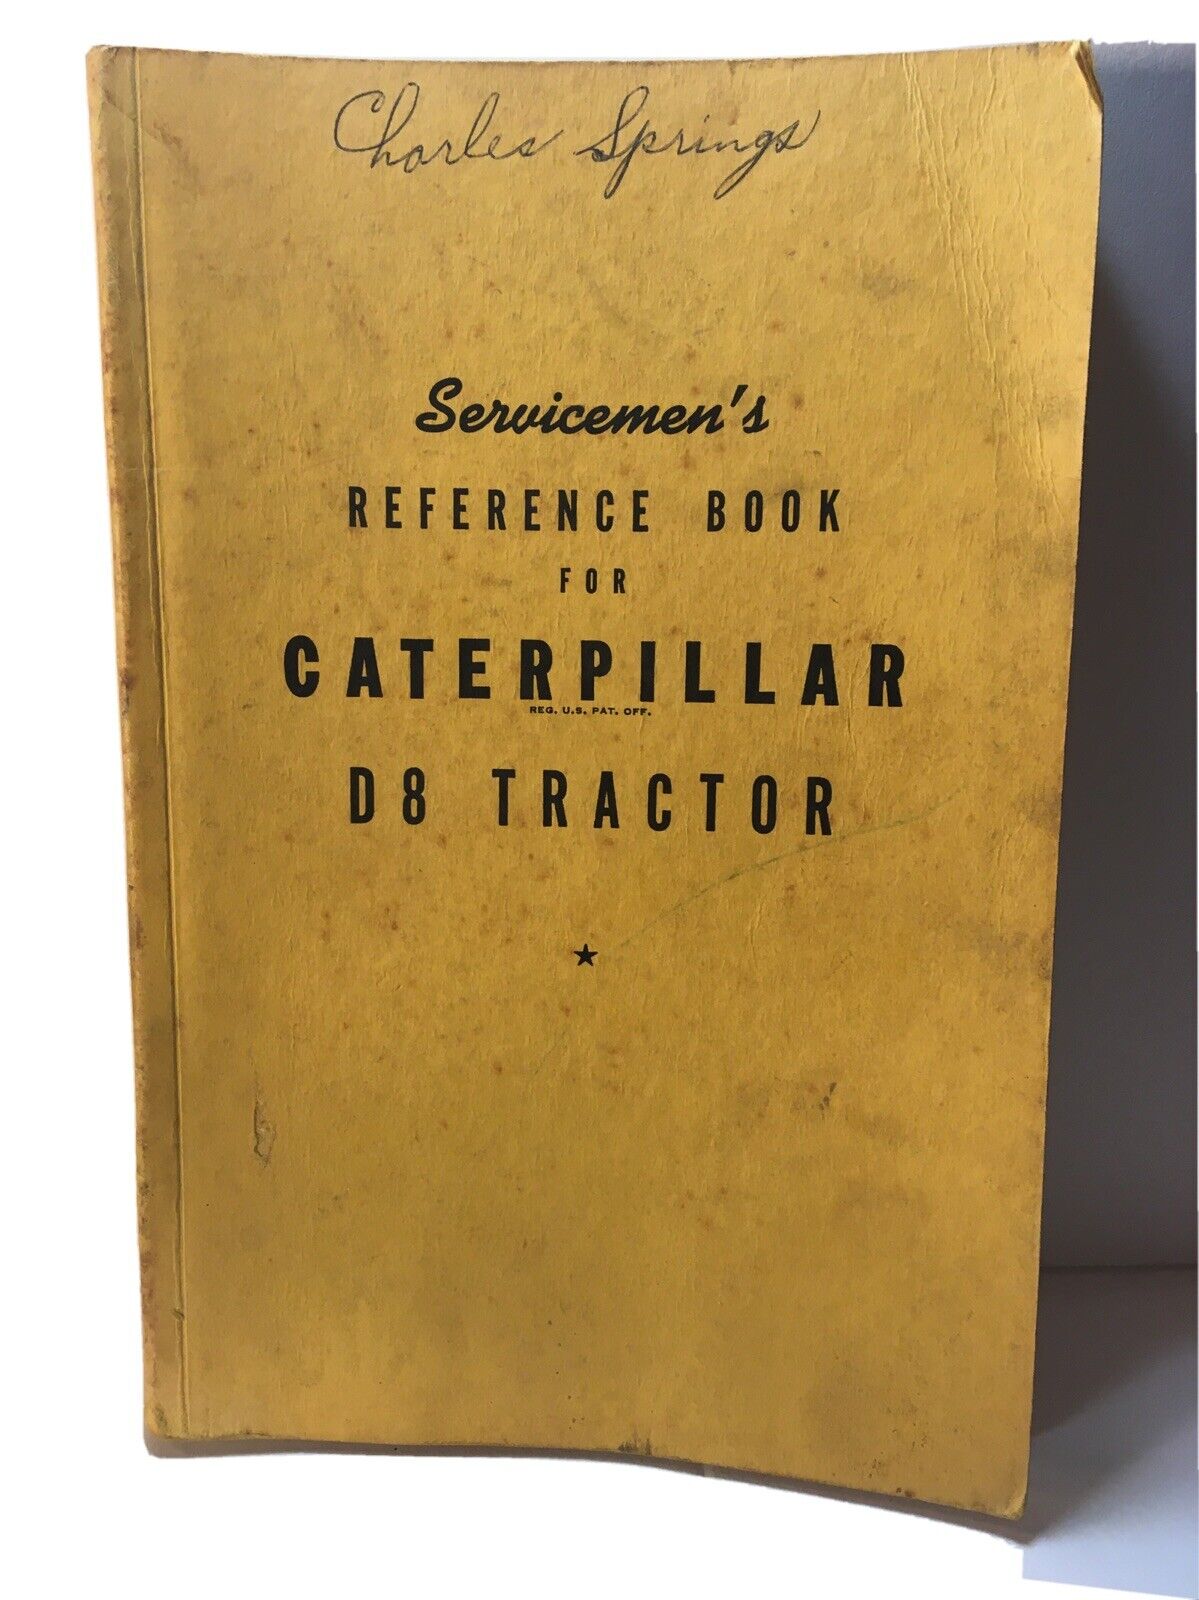 Vintage Servicemen’s Reference Book For Caterpillar D 8 Tractor, 1940’s VG